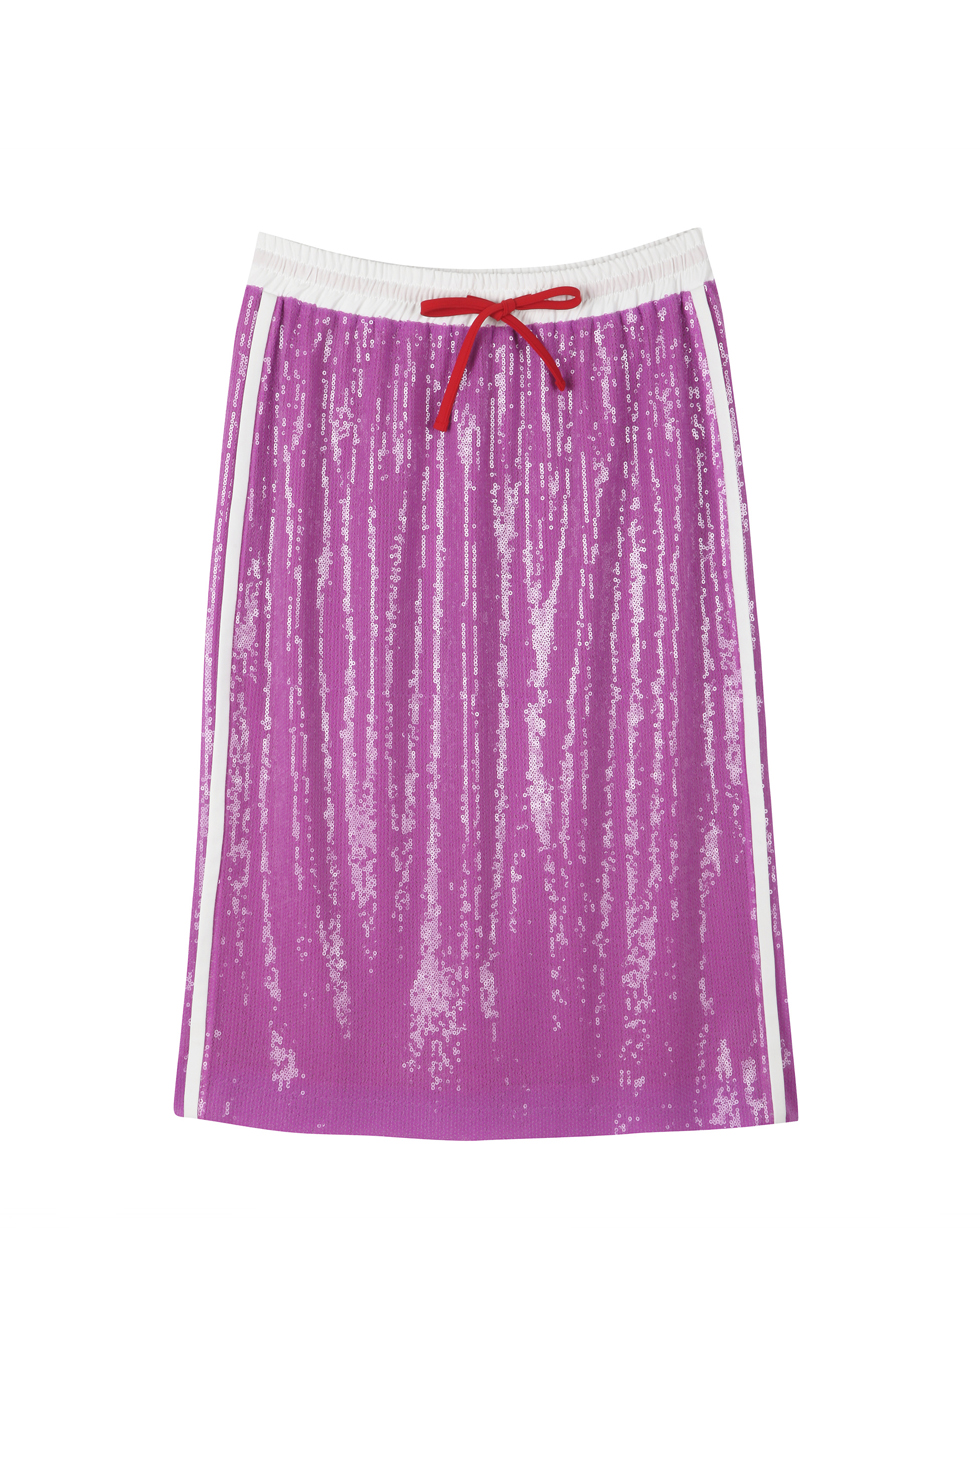 SEQUINED BAND SKIRT - PINK